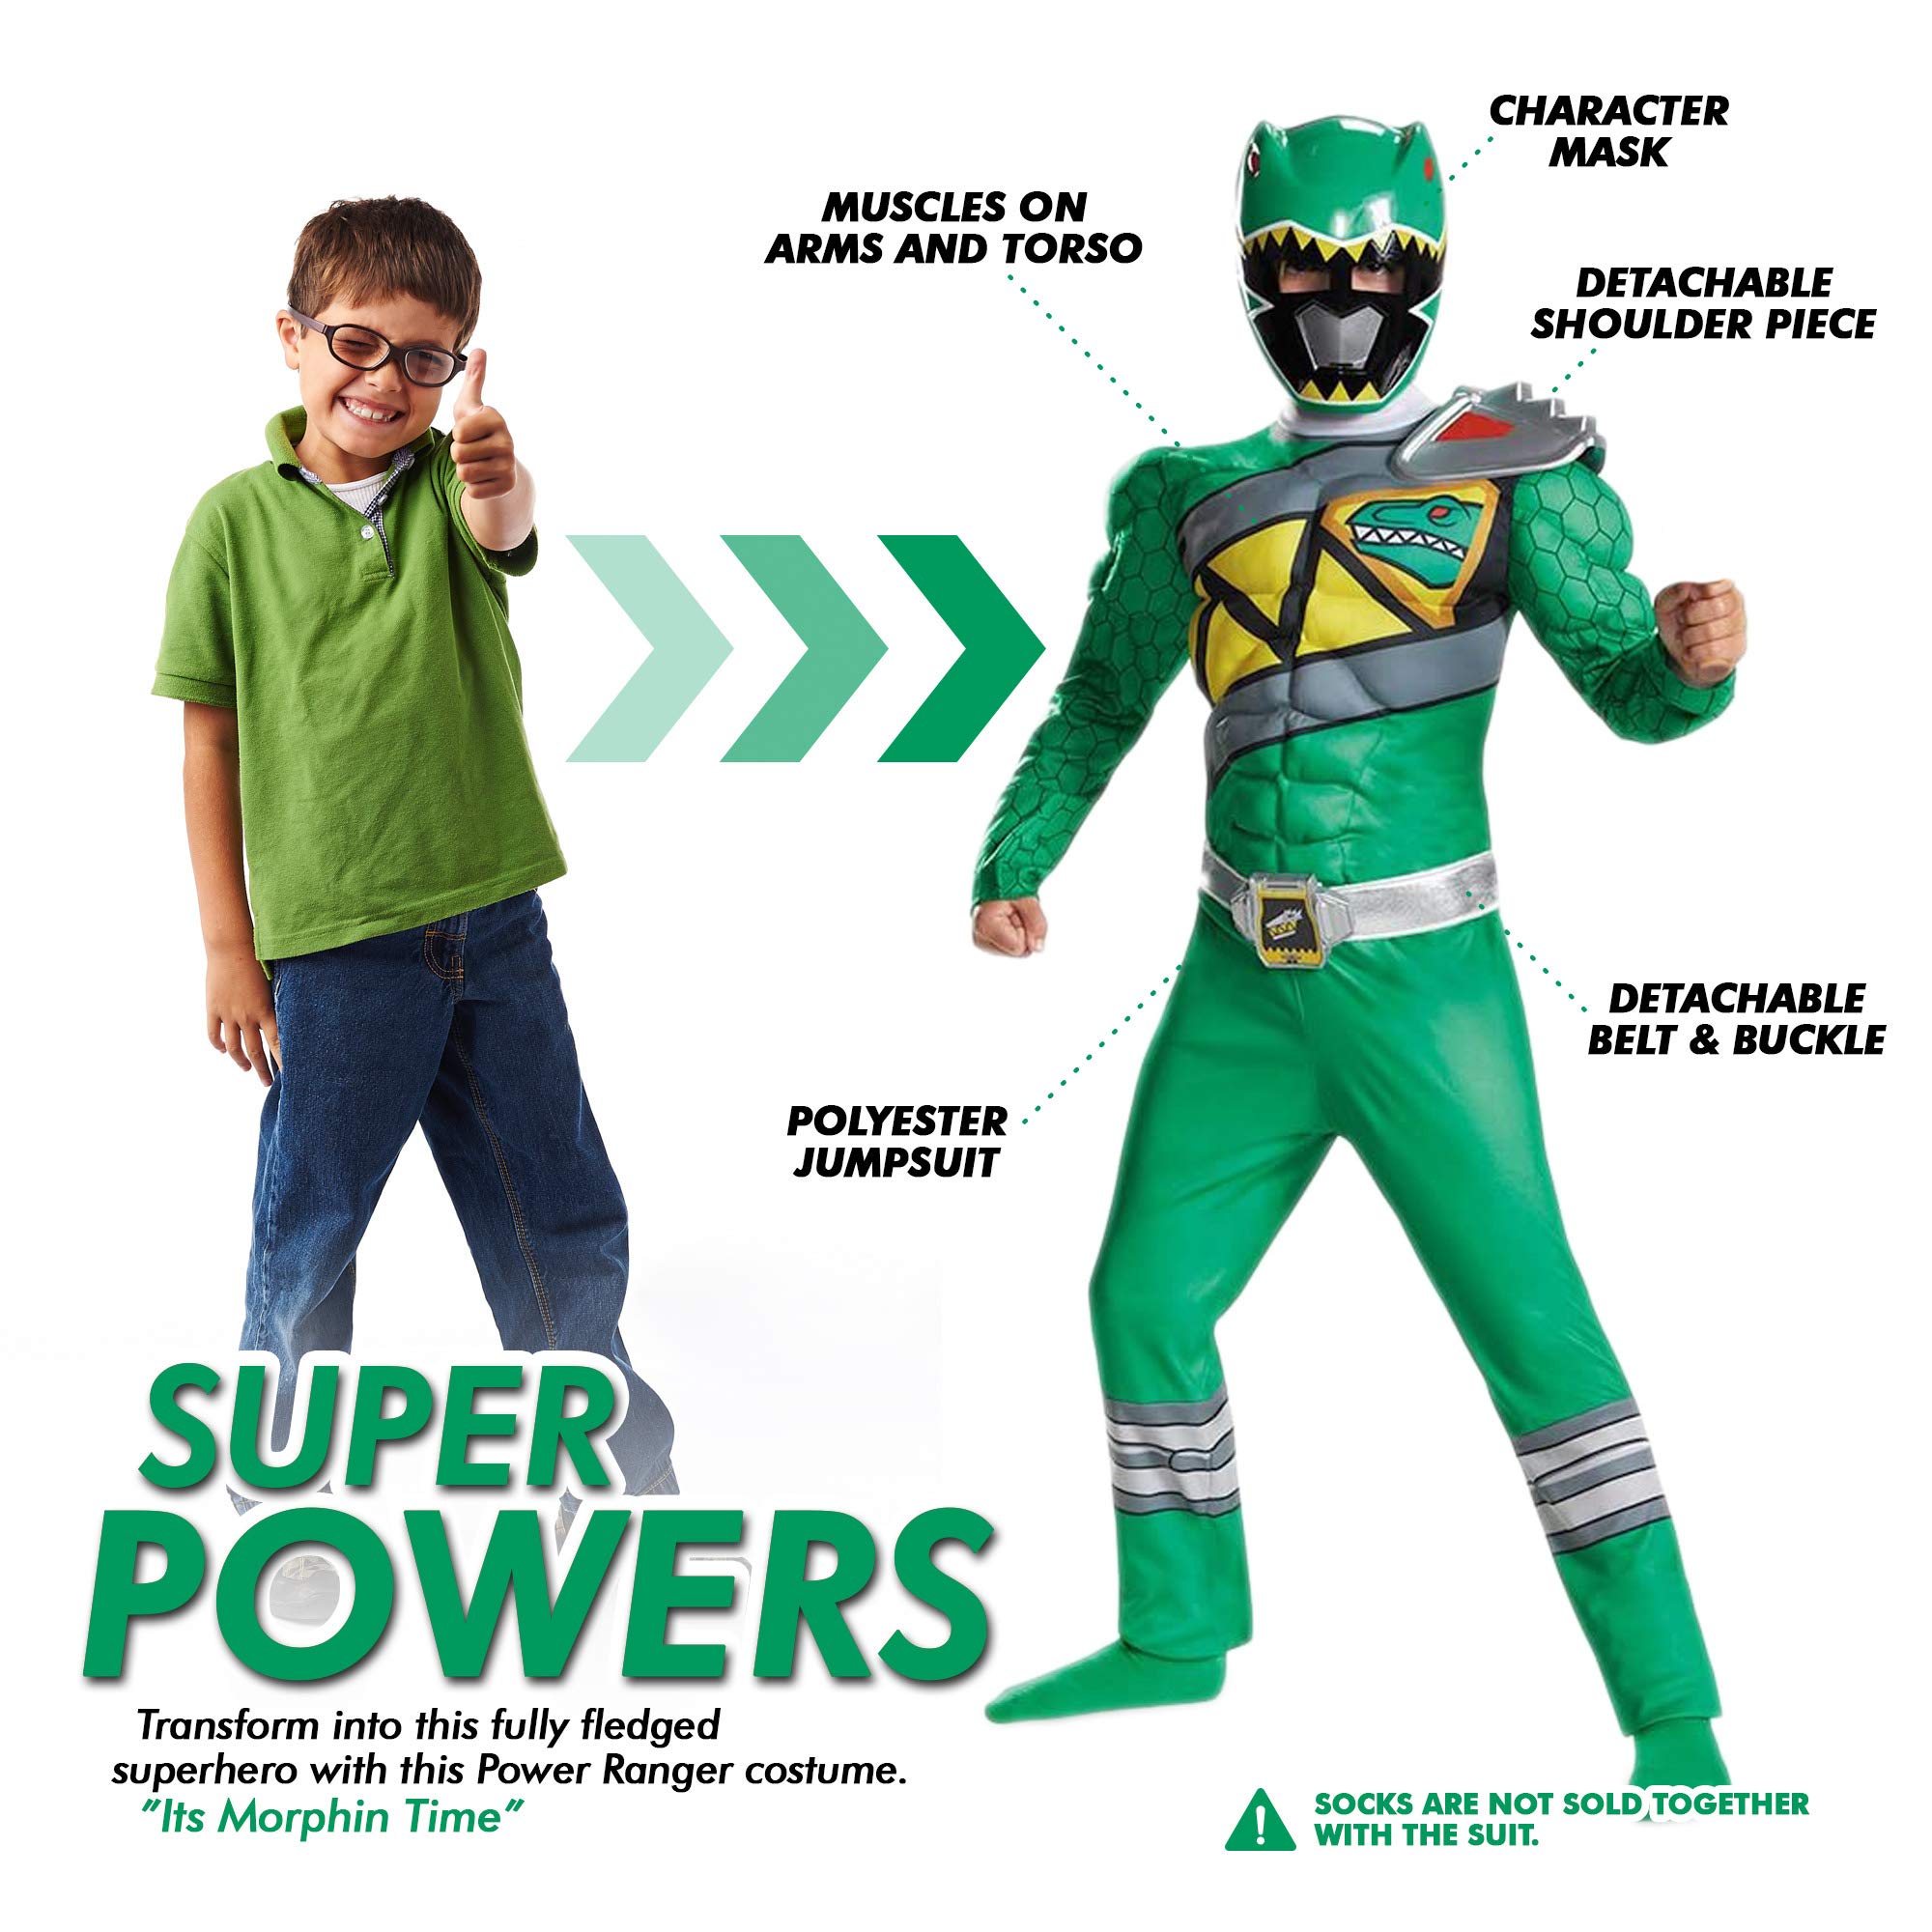 Green Power Rangers Costume for Kids. Official Licensed Green Ranger Dino Charge Classic Muscle Power Ranger Suit with Mask for Boys & Girls, Medium (7-8)